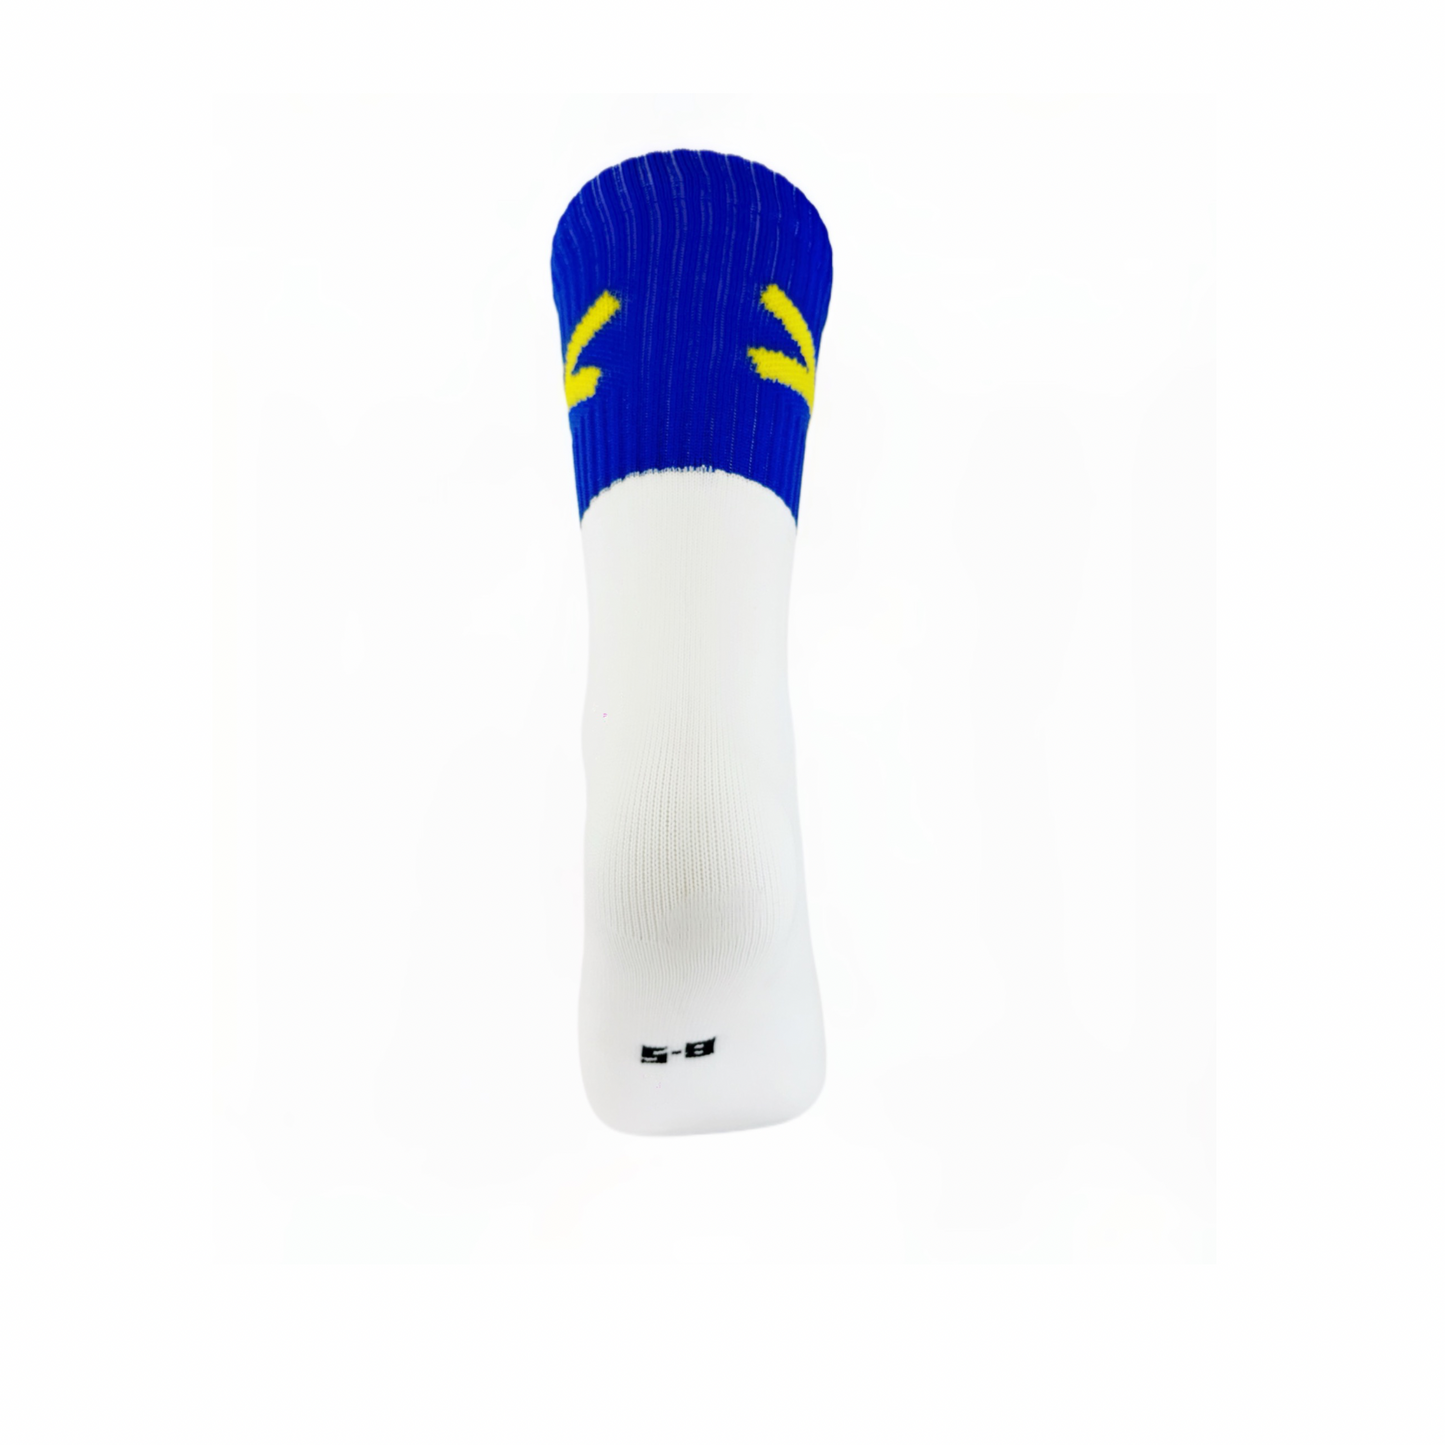 New and Improved X Gaelic Games sock (Blue and Yellow)